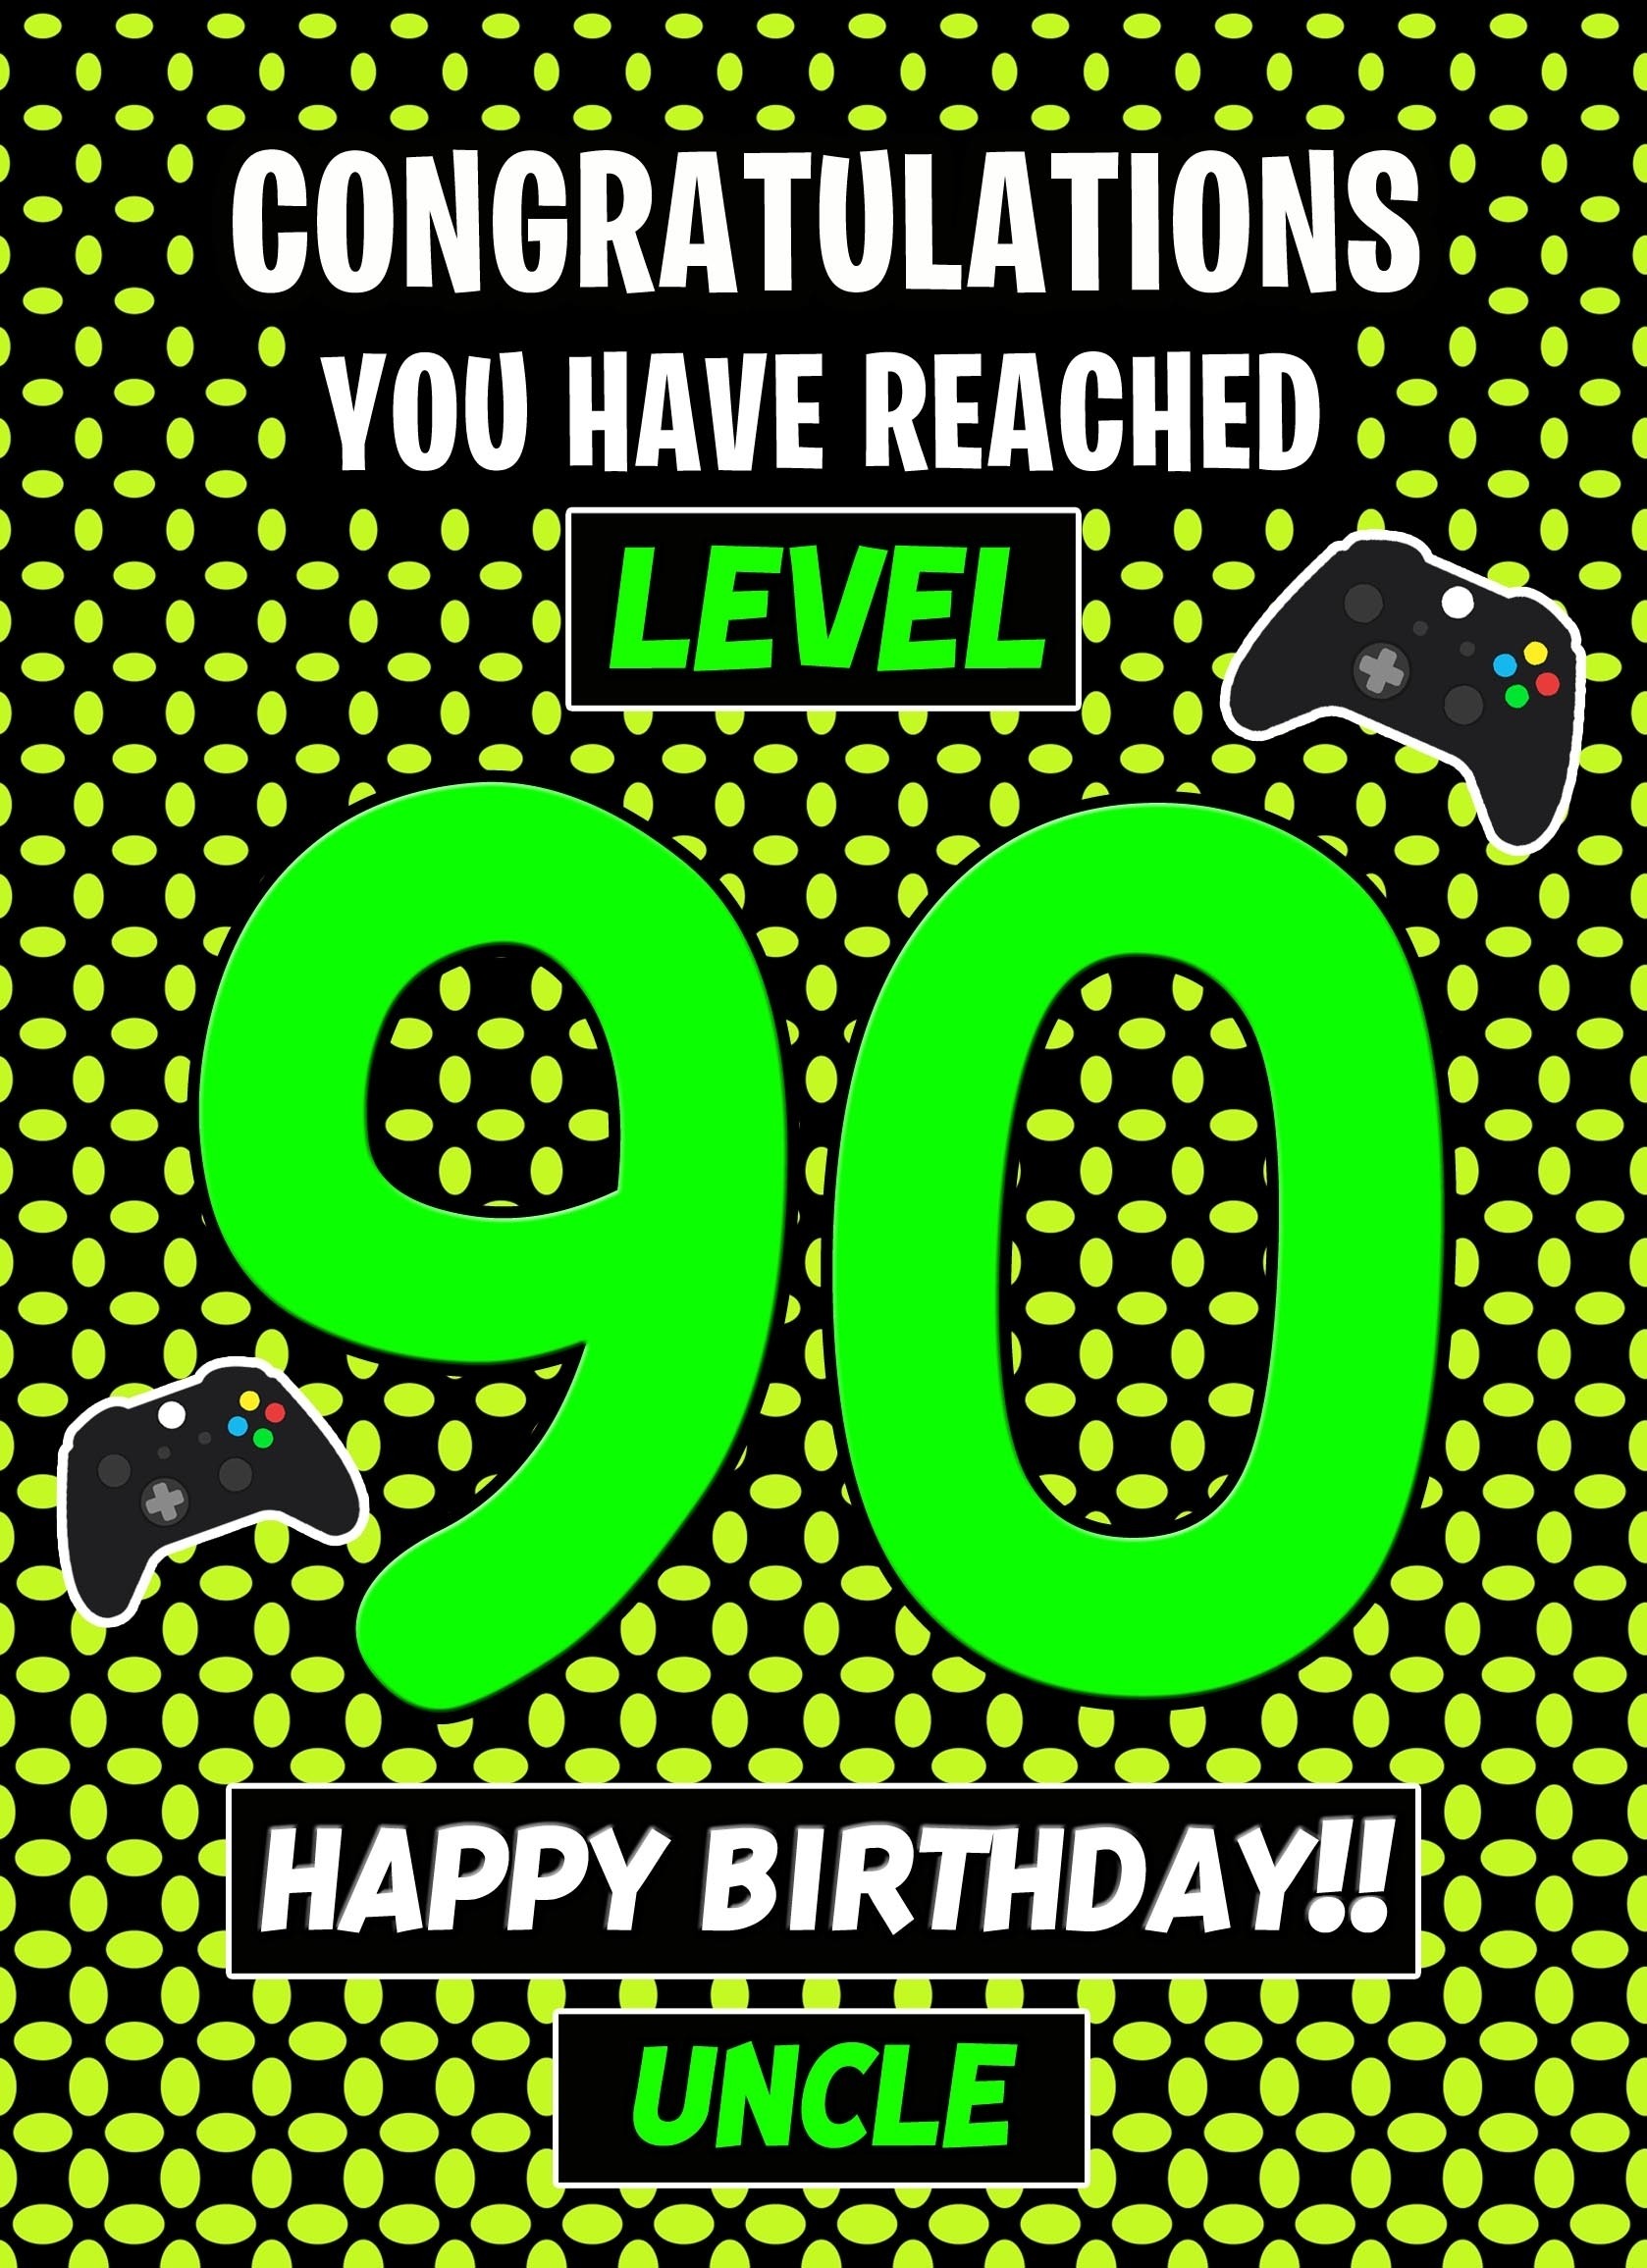 Uncle 90th Birthday Card (Level Up Gamer)